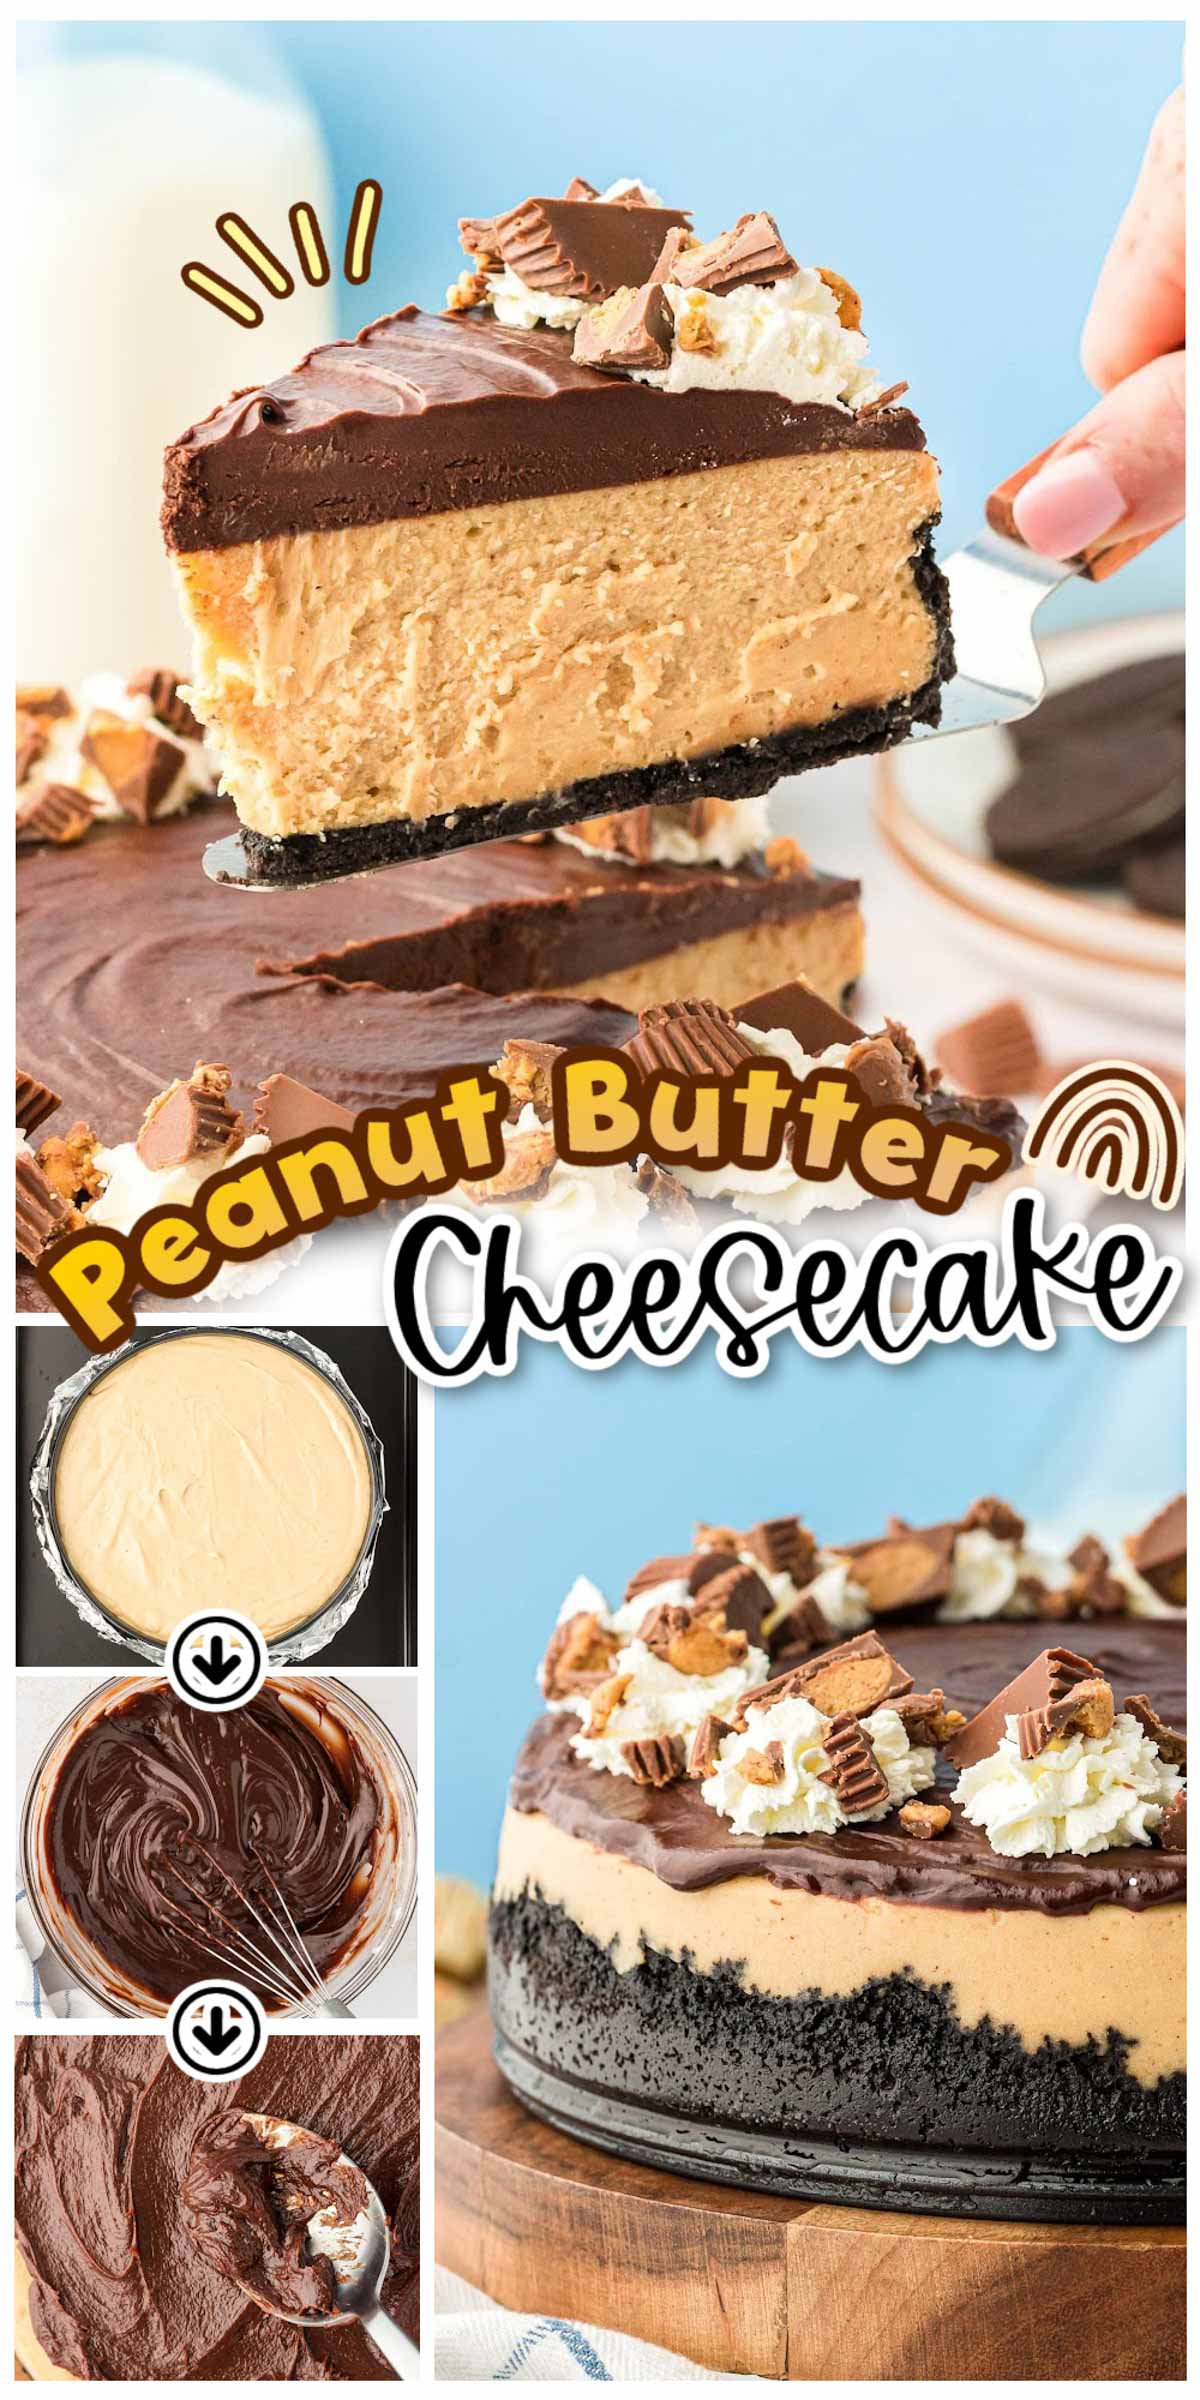 This Peanut Butter Chocolate Cheesecake recipe is a silky, peanut buttery dessert with an Oreo cookie crust and a rich chocolate ganache topping! via @sugarandsoulco